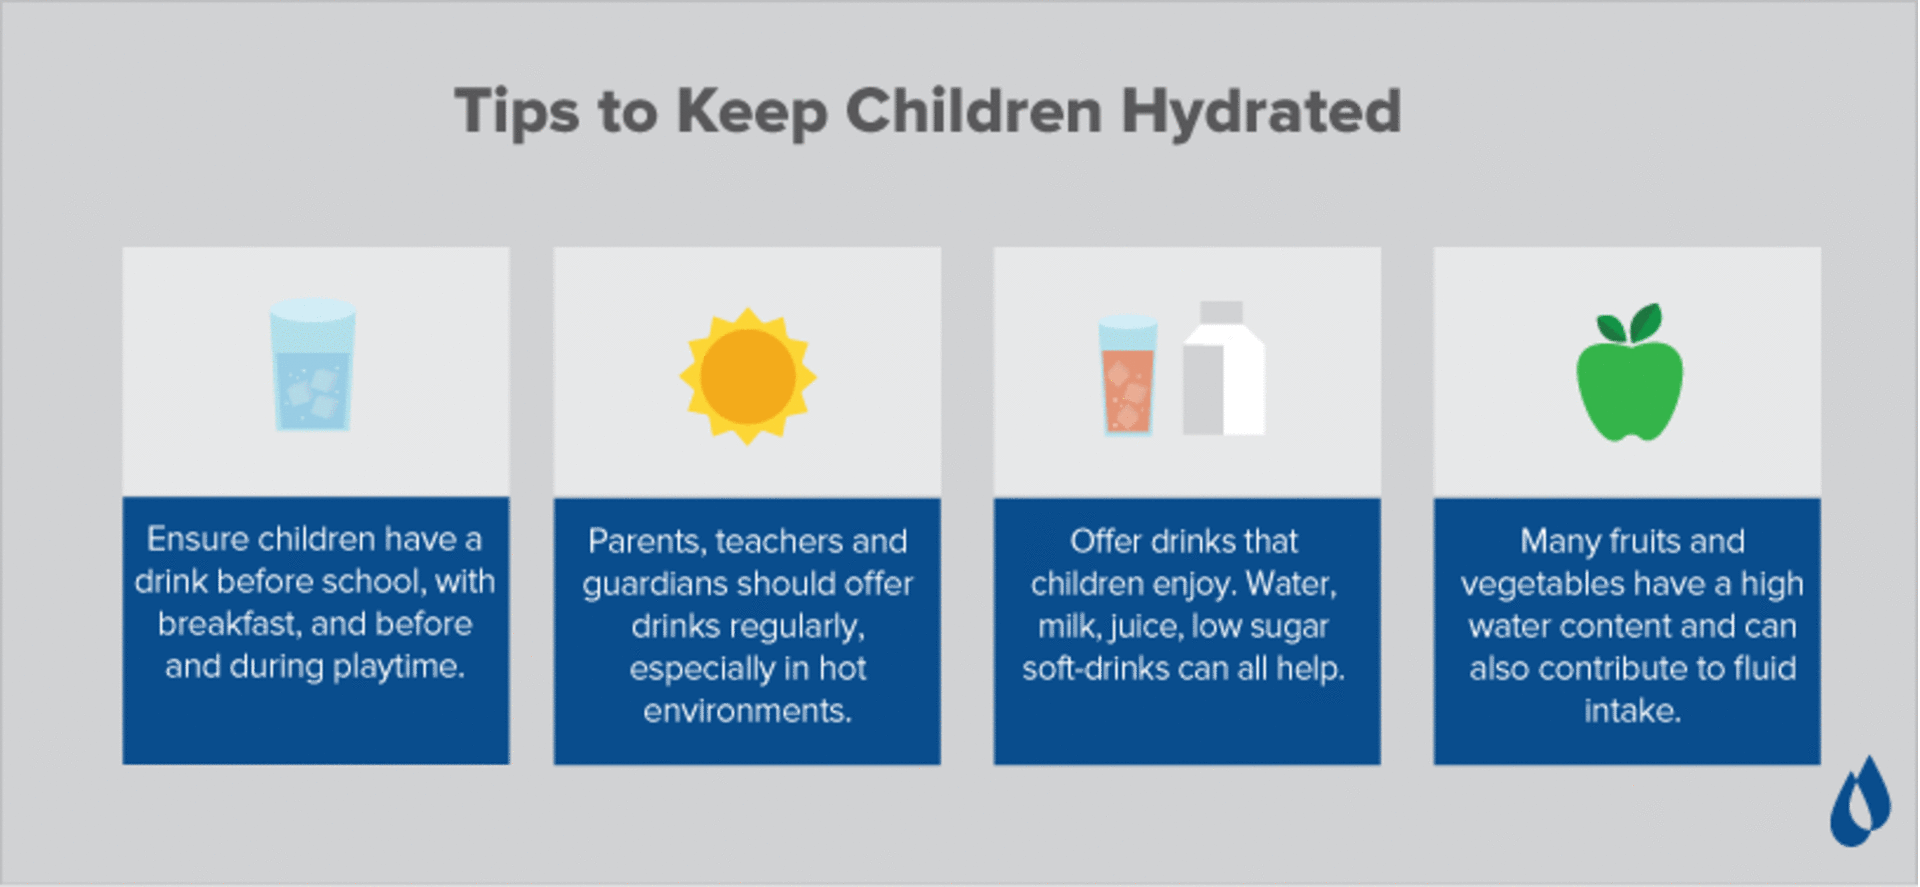 Tips to keep children hydrated